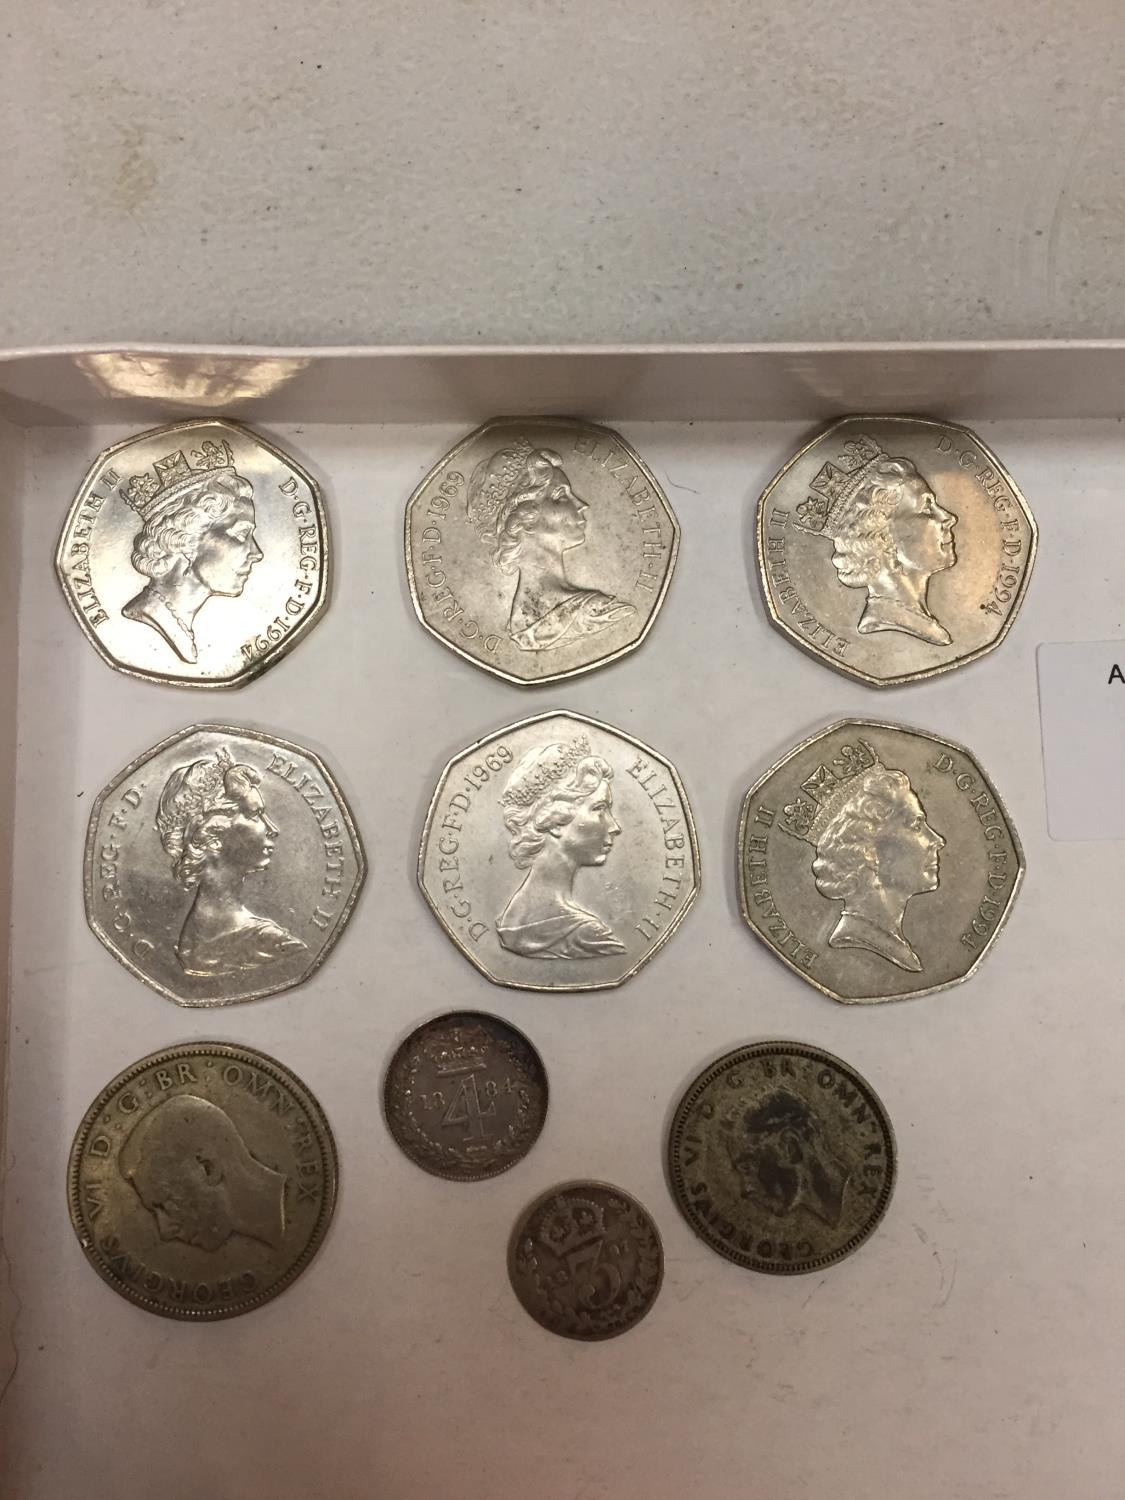 TEN VARIOUS COINS - SIX DECIMAL 50 P, 1884 MAUNDY 4 P, 1941 FLORIN, 1945 SHILLING AND 1897 3 d - Image 3 of 3